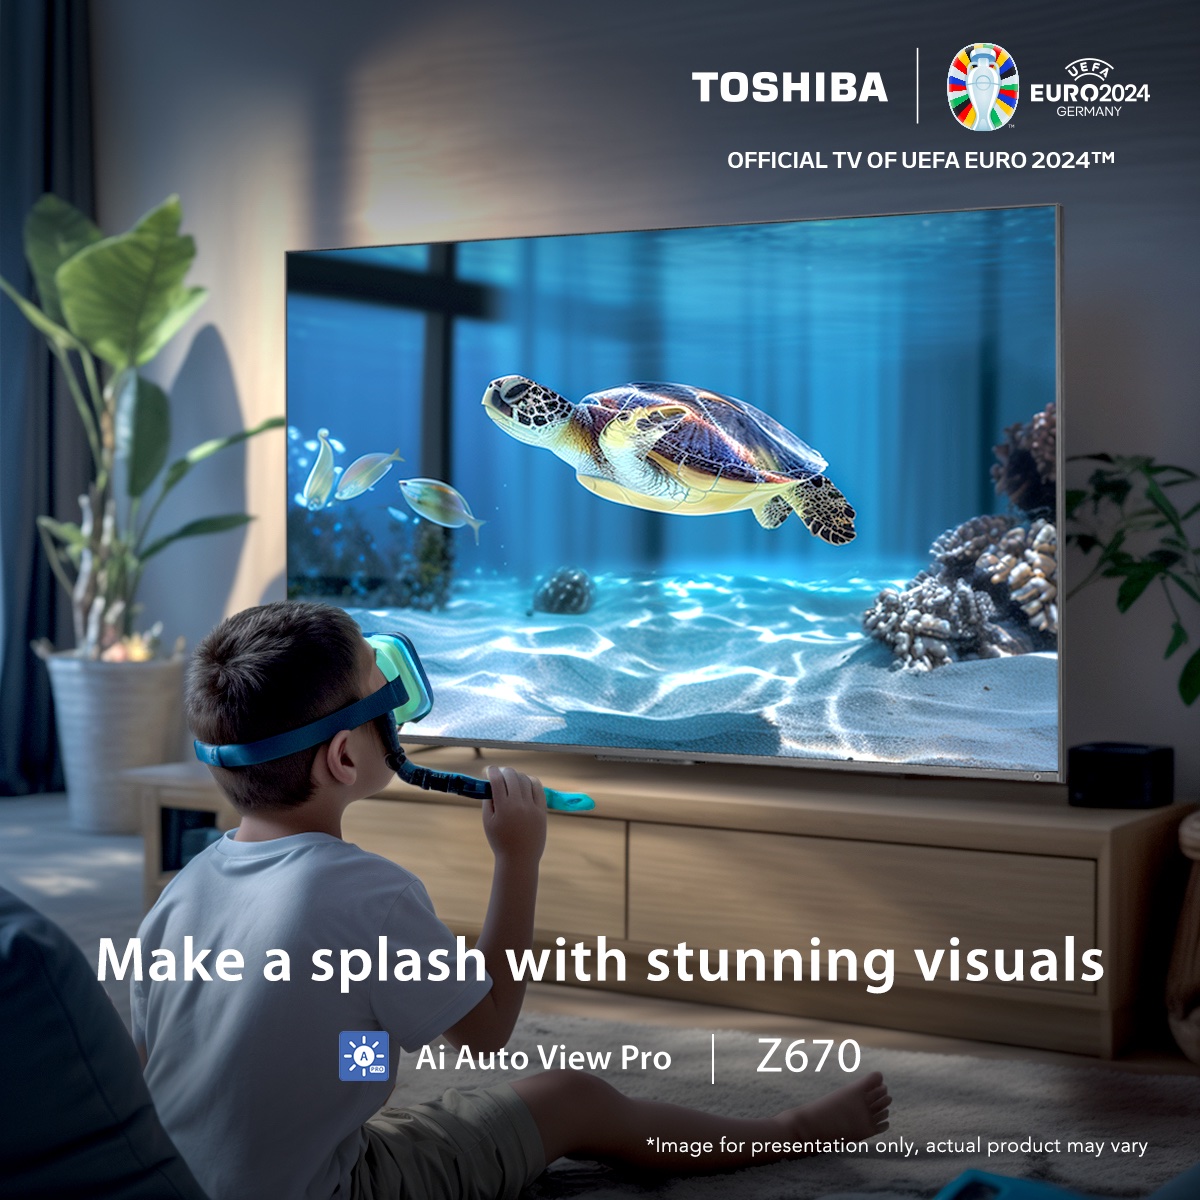 Who needs tortoiseshell glasses with #ToshibaTV Z670's eye protection? This #WorldTurtleDay, watch turtles clearly and comfortably. What’s your favorite turtle moment on TV? Comment, hit 'Like' if you love turtles, and follow for more. #TurtleView #BeRealCraftsmanship